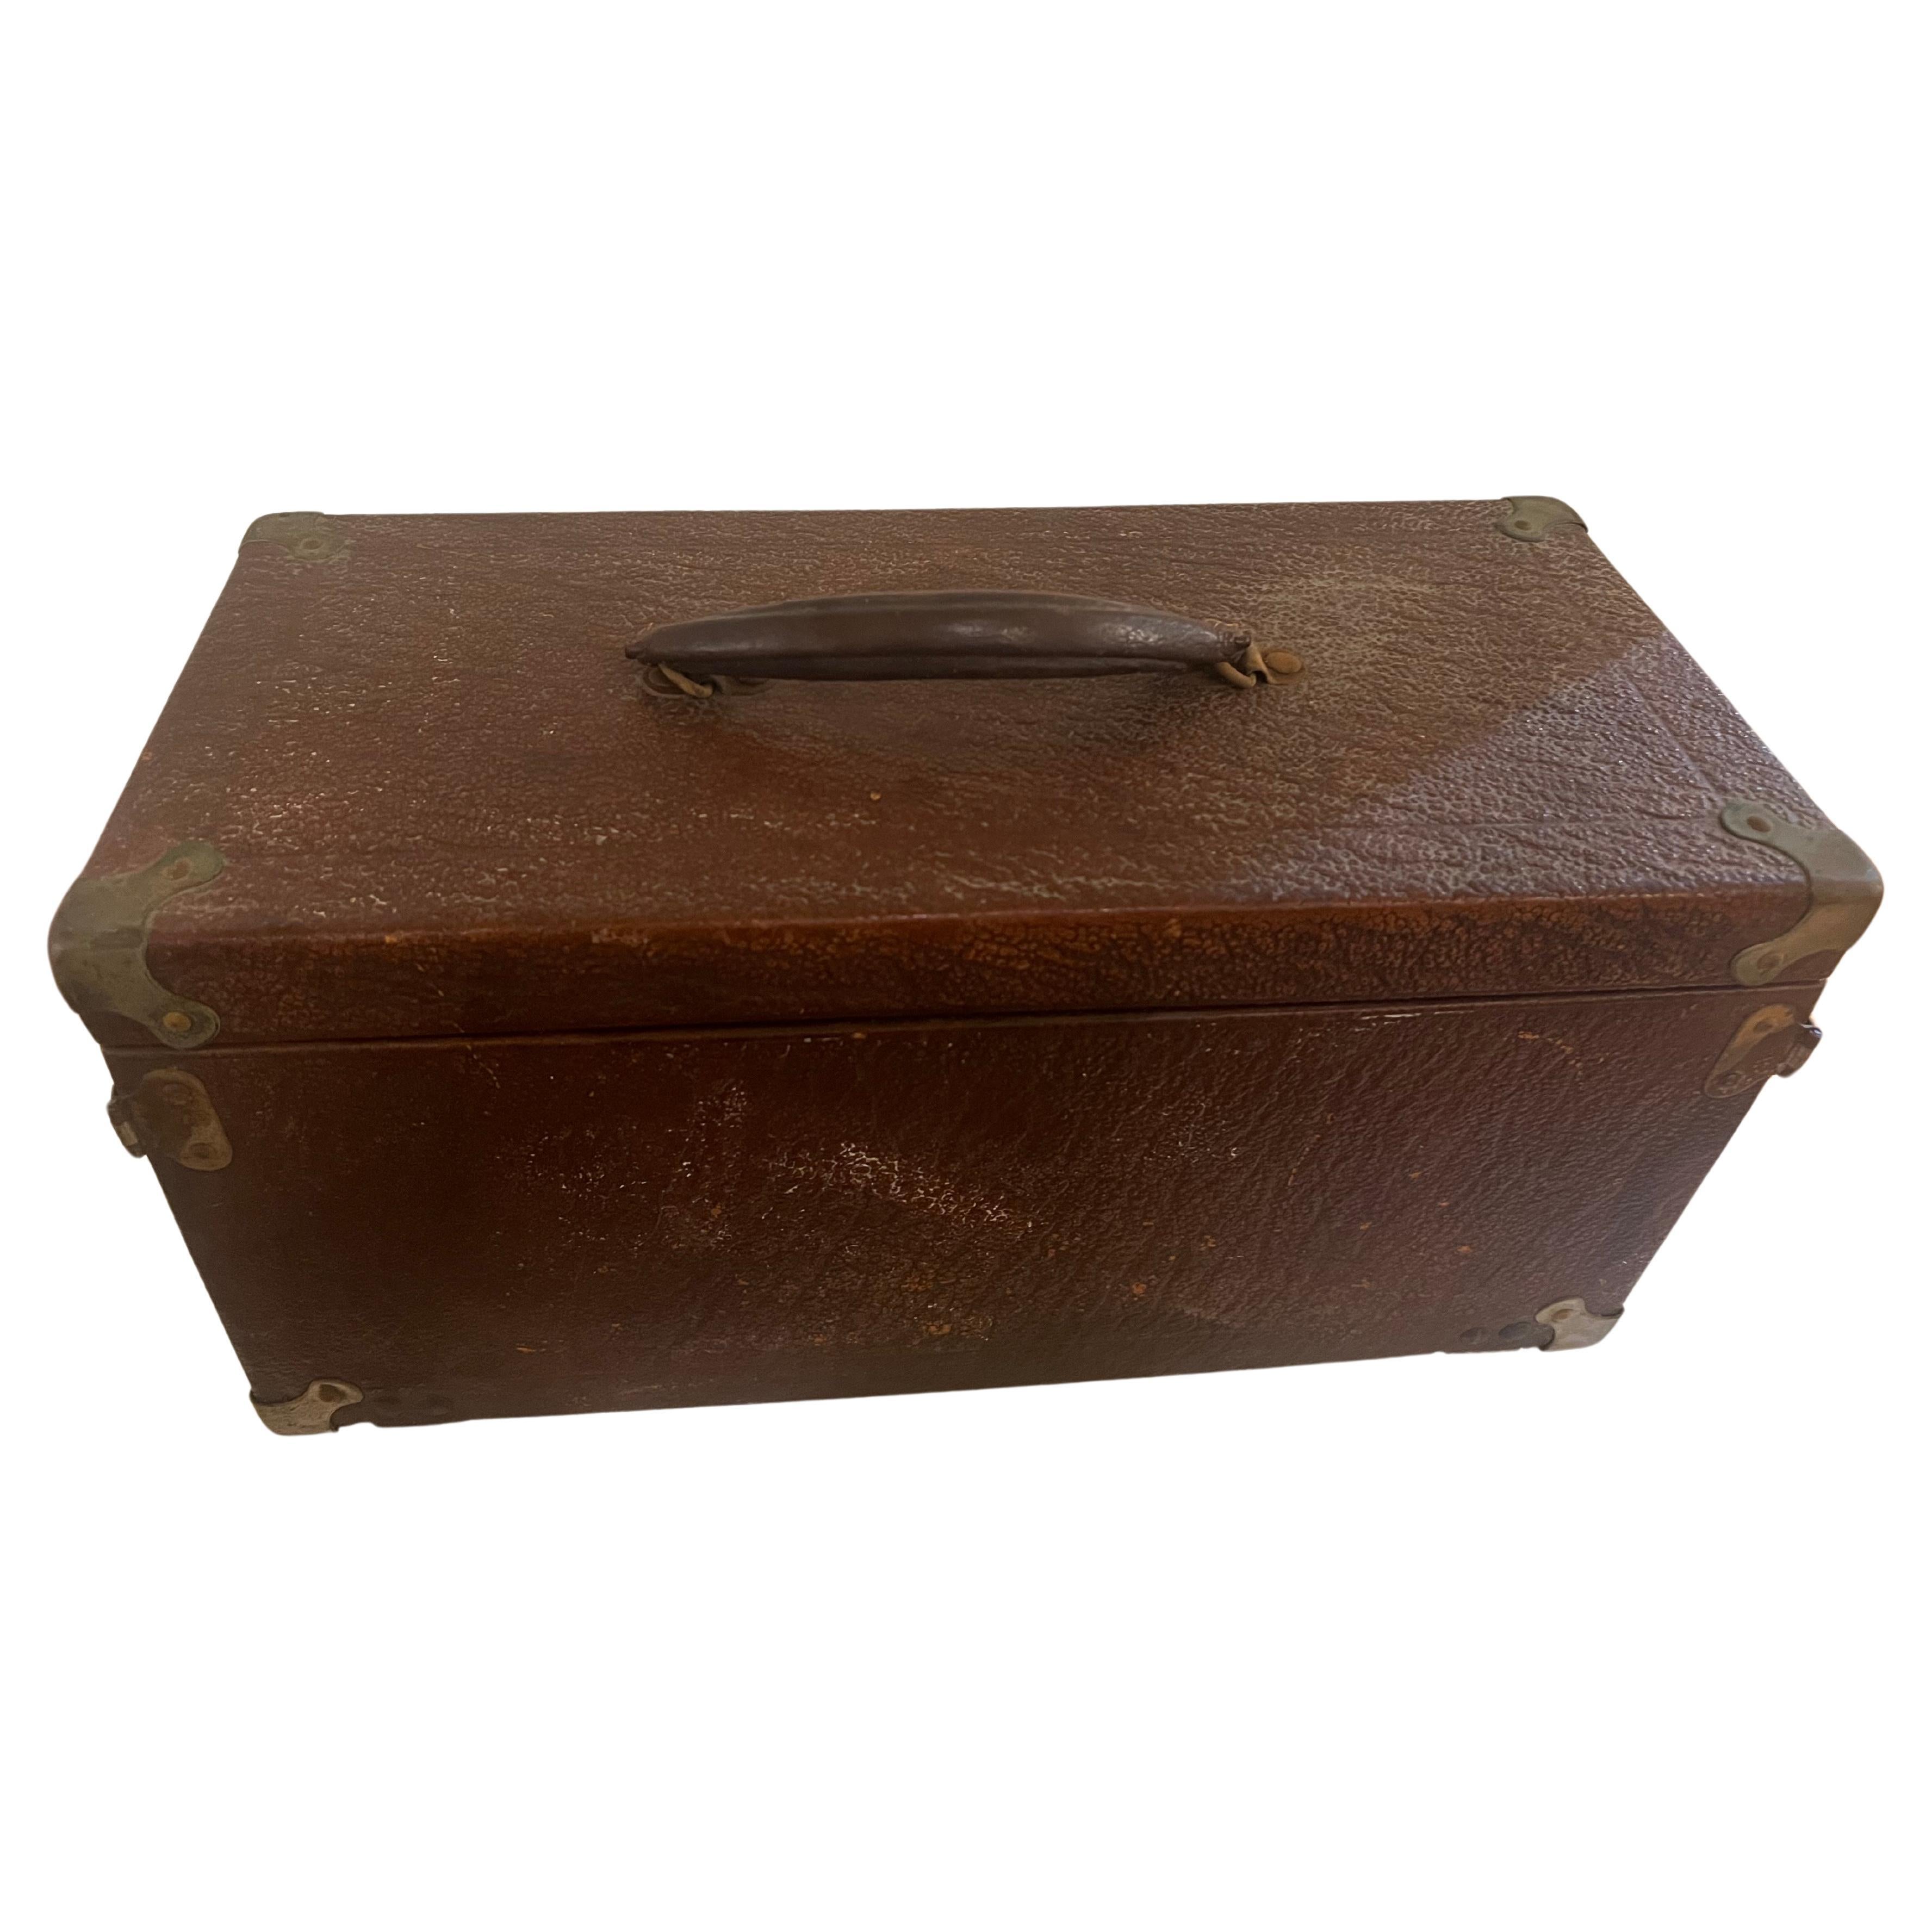 Antique Leather & Stainless Steel Medical Box with Drawers and compartments 2